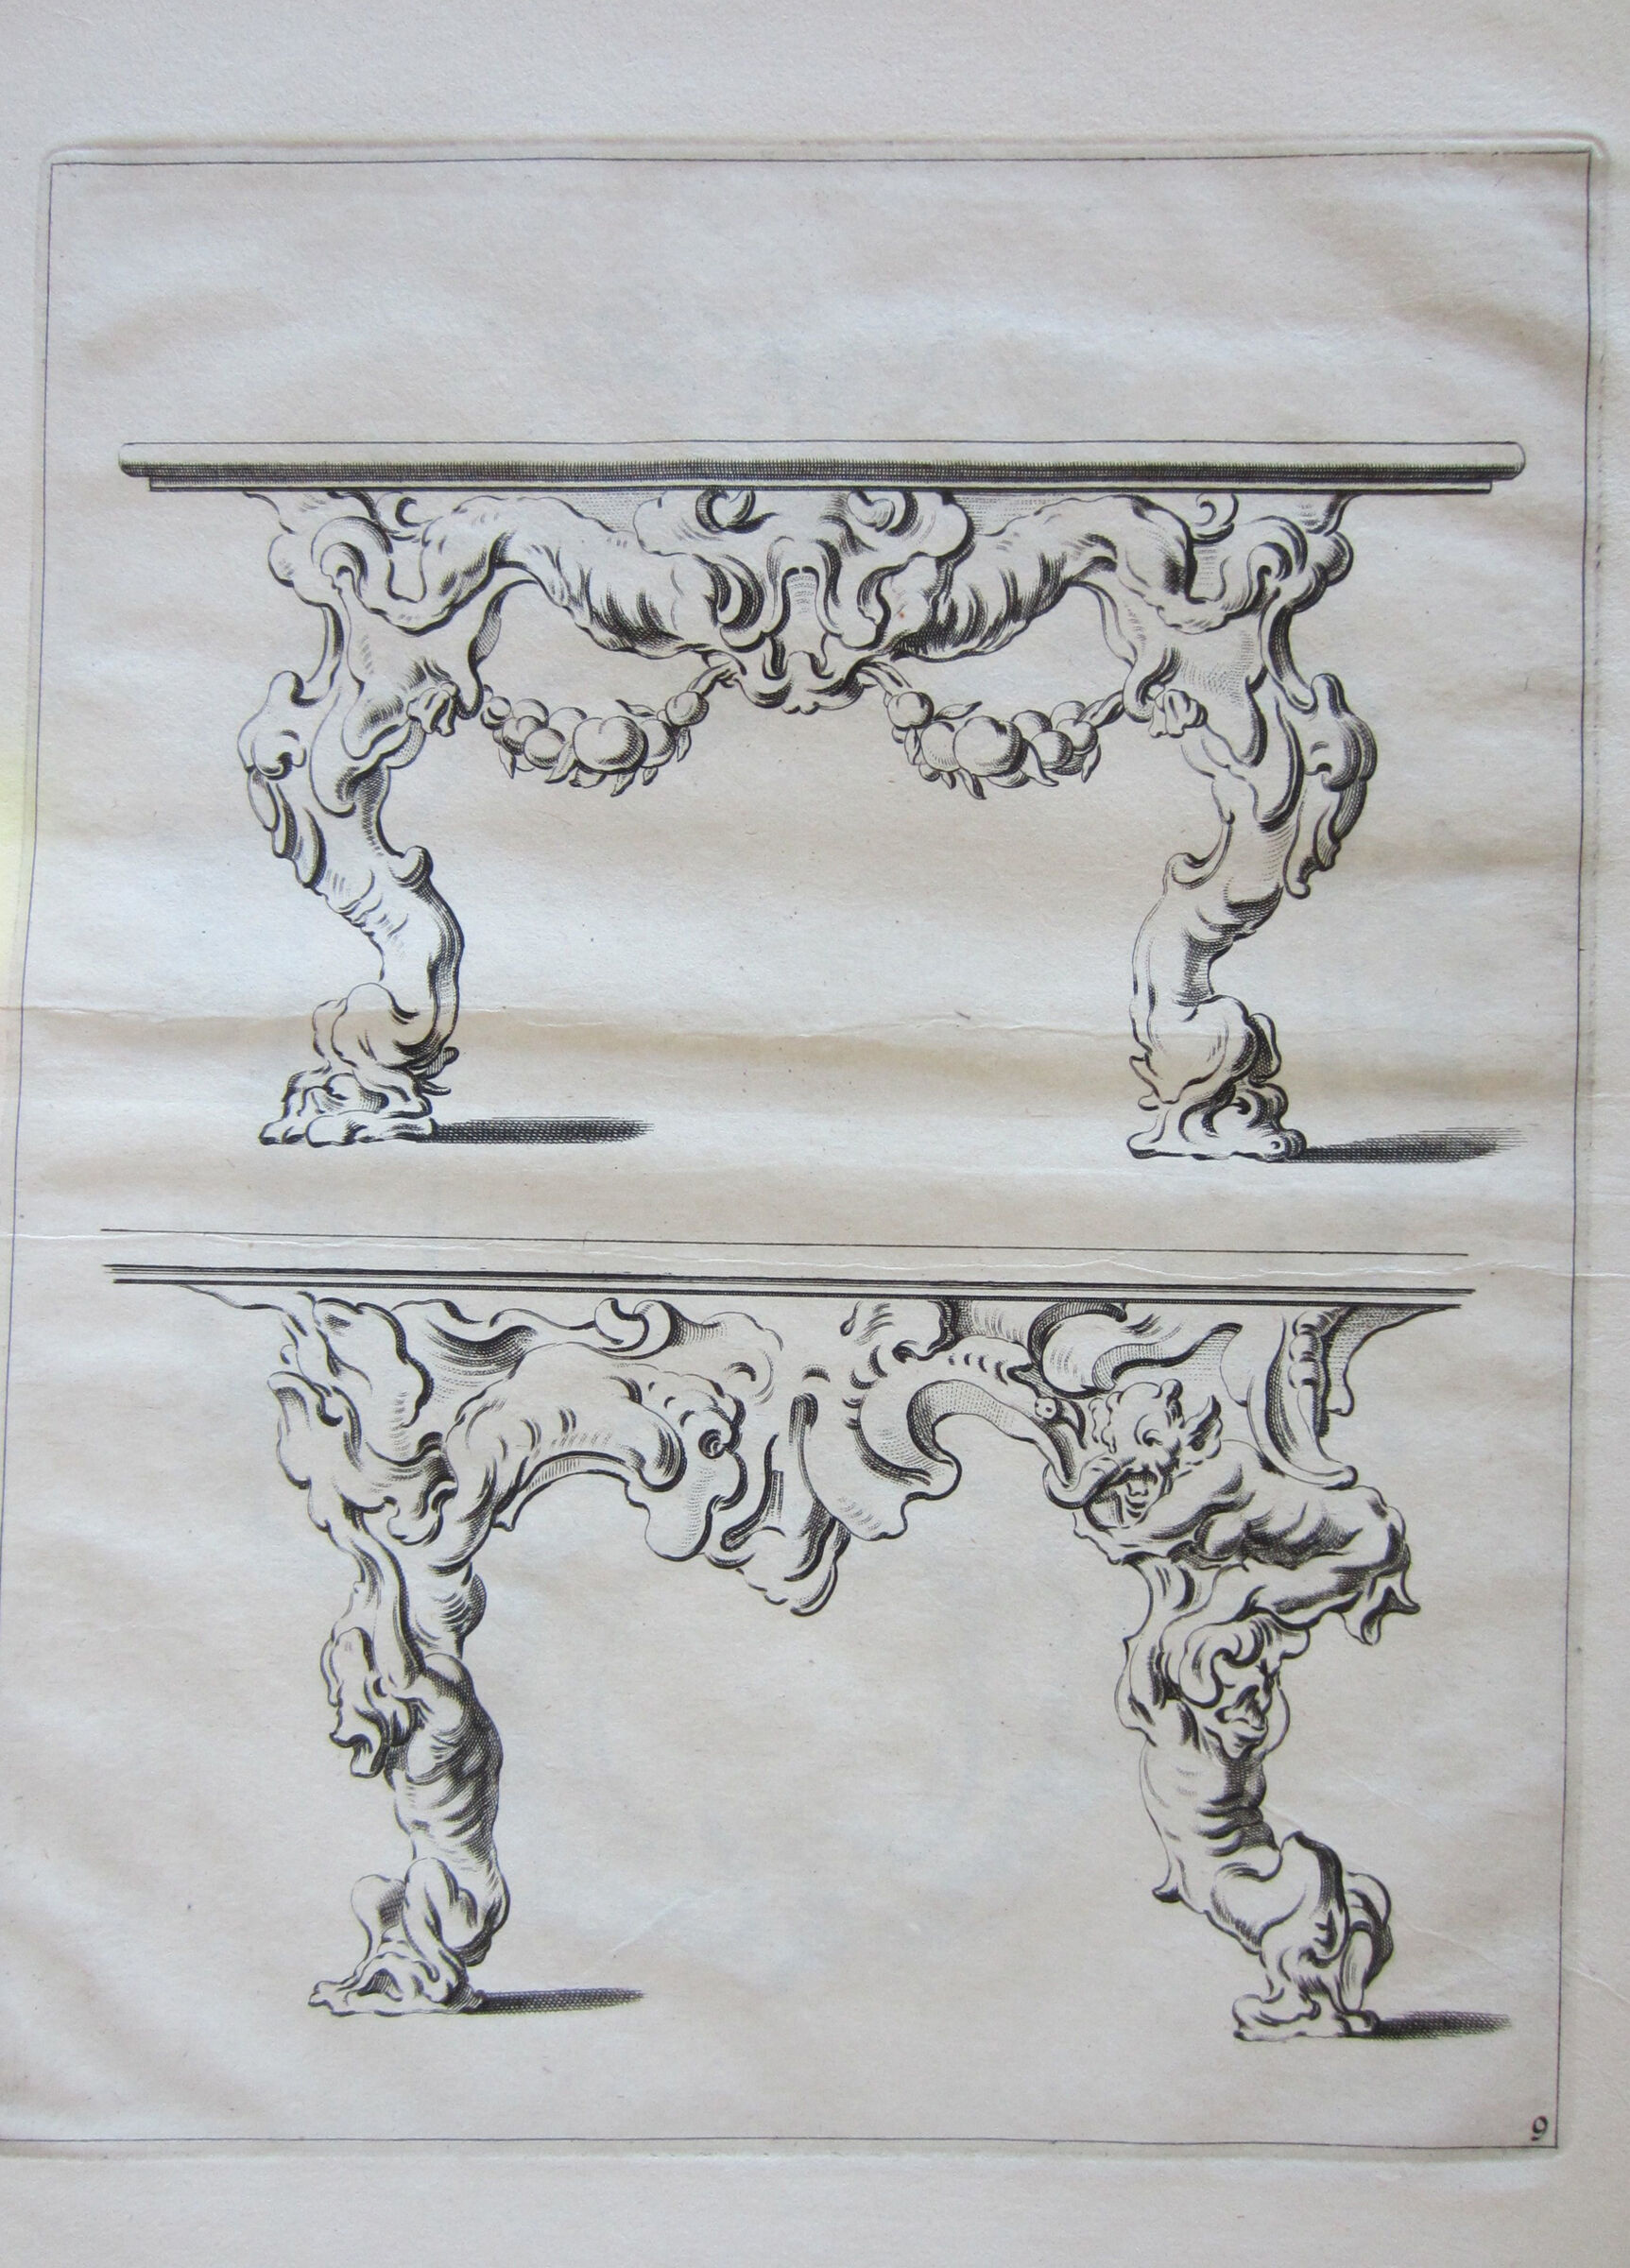 Auricular Designs For Two Tables, The Upper With Fruit Garlands, The Lower With Muscular Figures As Legs